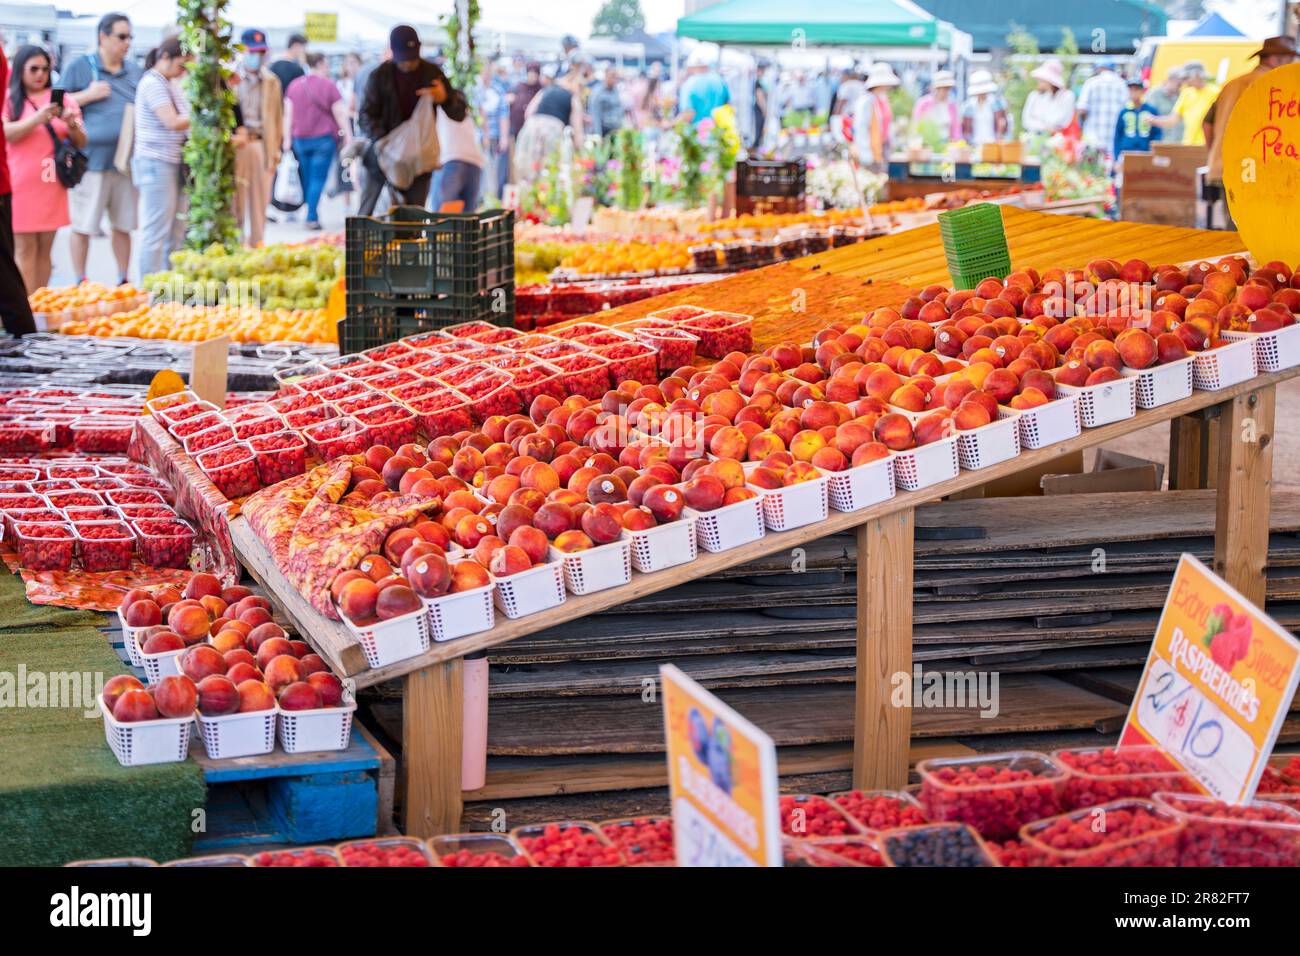 St Jacobs Farmers Market Fruit and Vegetable Vendors, Ontario, Canada Foto Stock